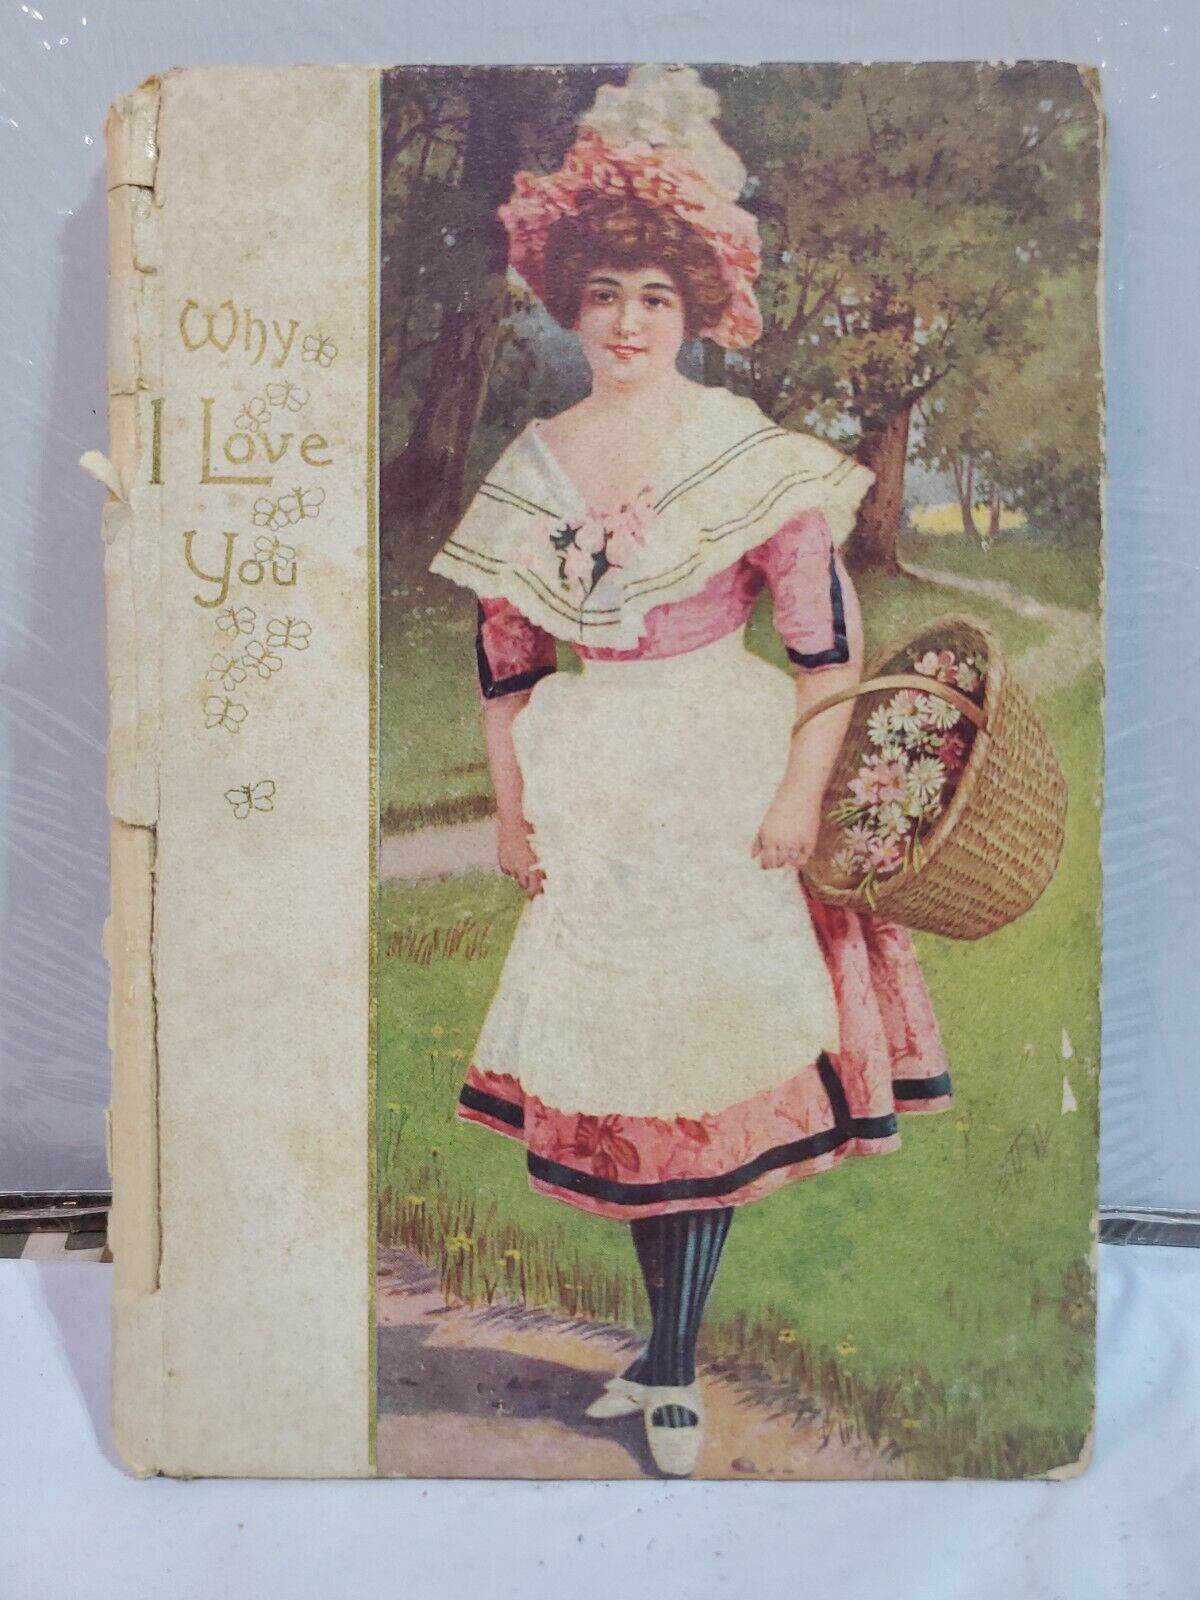 Why I Love You 1907 Cupples & Leon Superb Edwardian Hardcover Romantic Poems